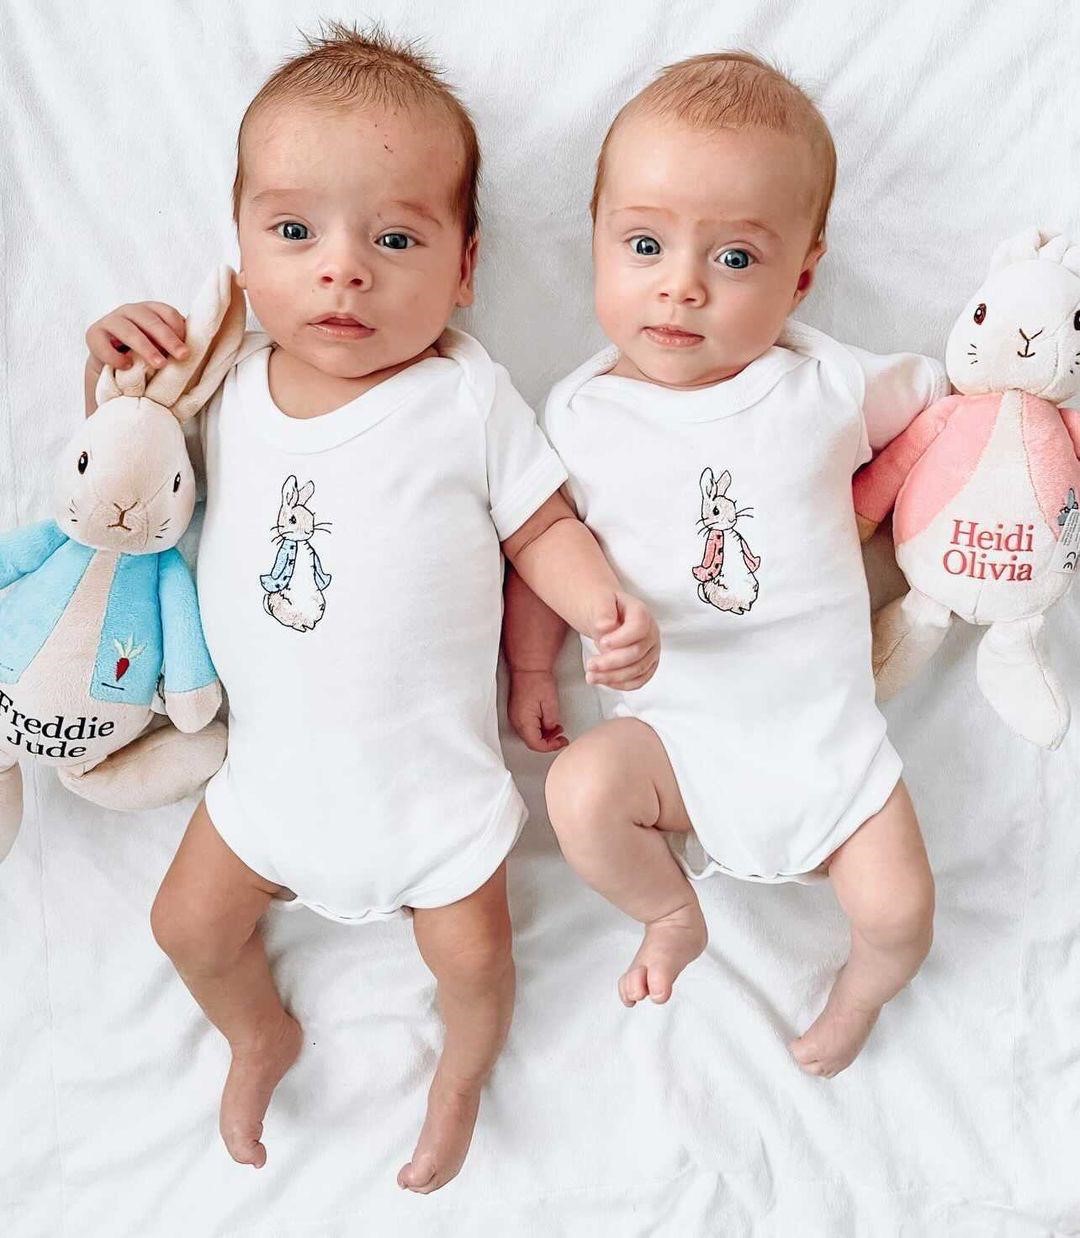 Clothing Unisex Kids Clothing Unisex Baby Clothing Bodysuits Baby Gift Set for Halloween New Baby Sleeper Suit Bib and Hat Set Peter Rabbit / Flopsy Bunny My First Halloween Baby Outfit Set 